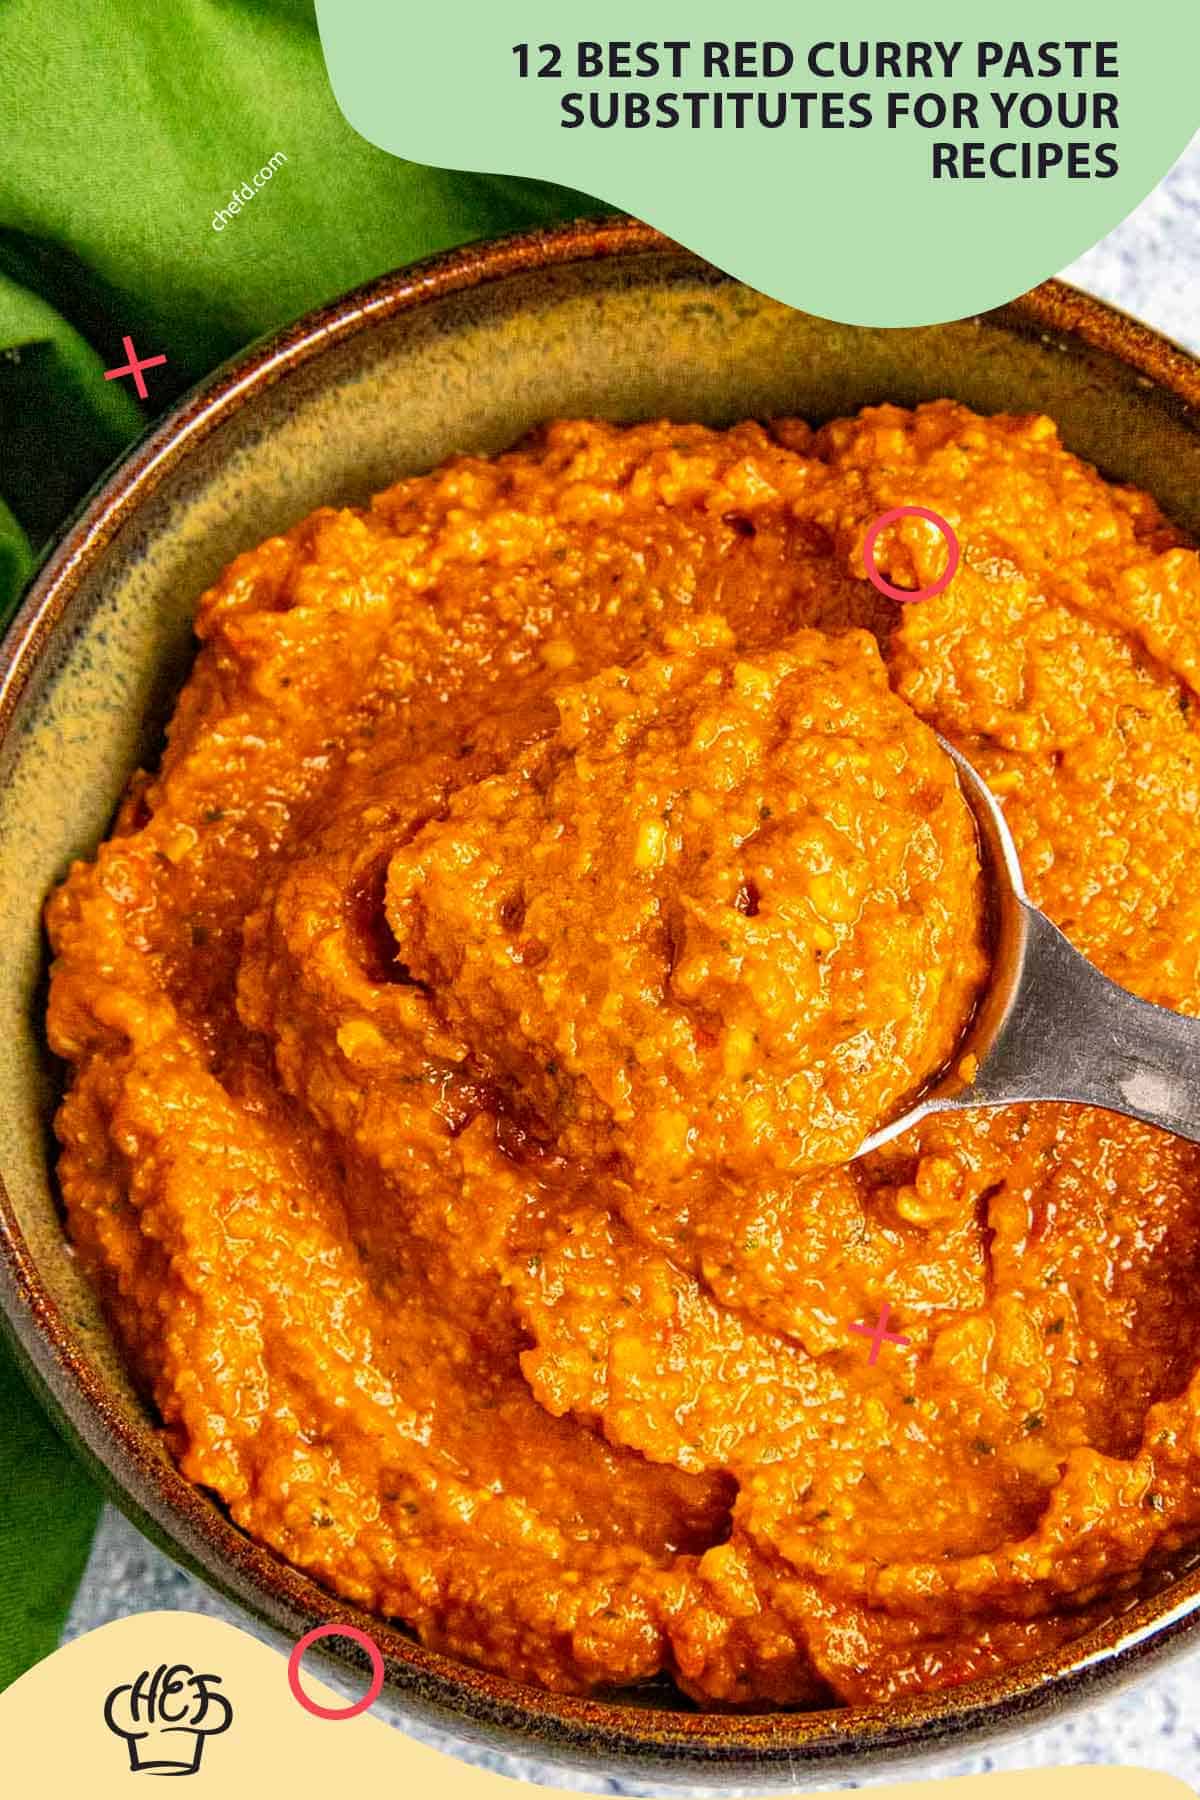 red curry paste substitutes